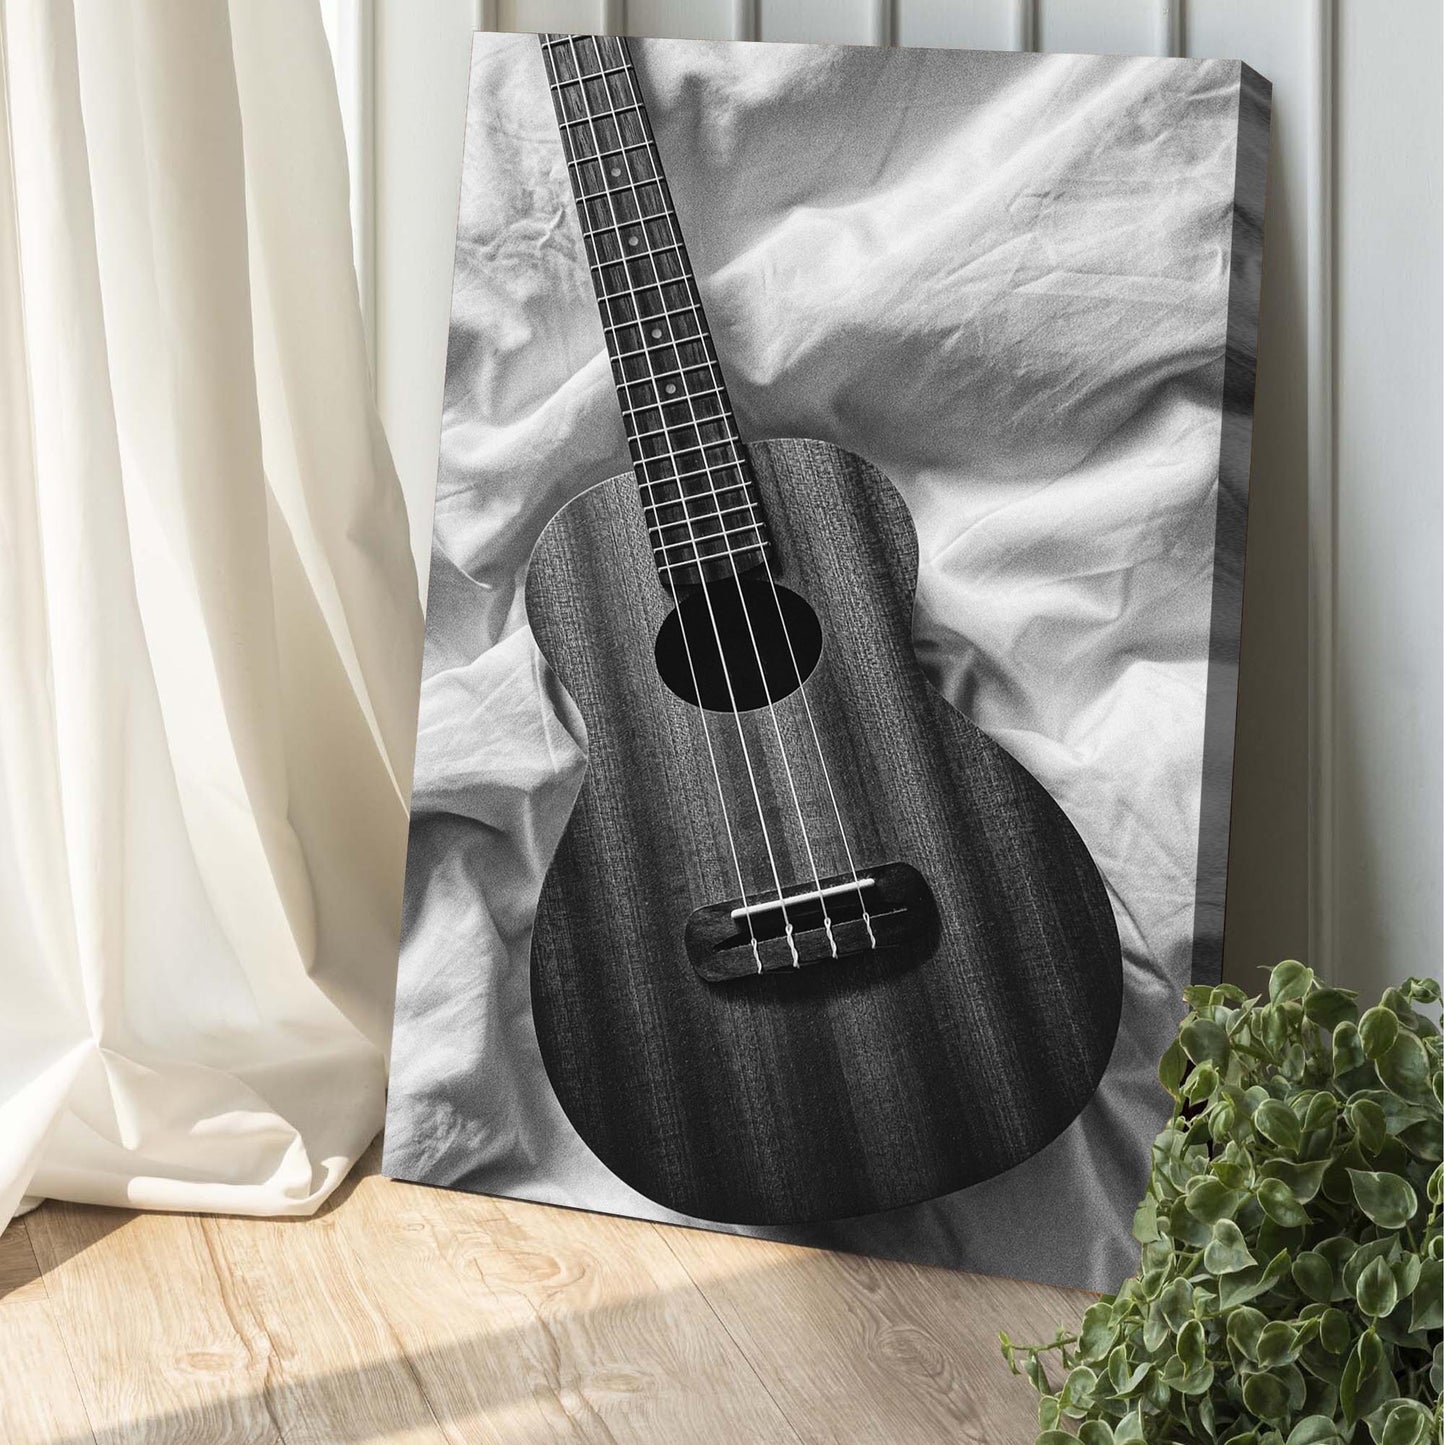 Ukulele Monochrome Canvas Wall Art - Image by Tailored Canvases